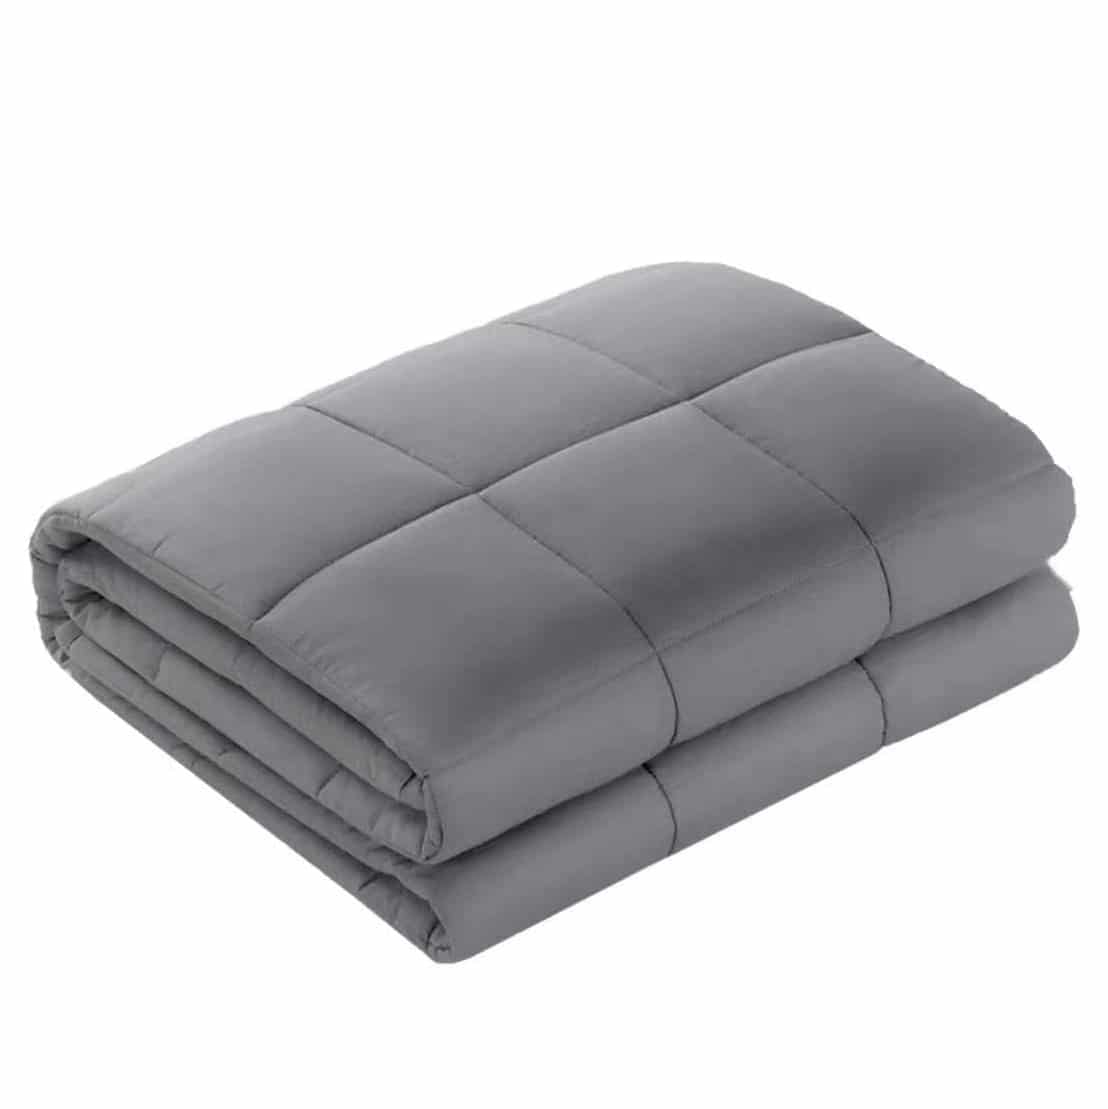 Top 10 Best Adults Weighted Blankets in 2021 Reviews